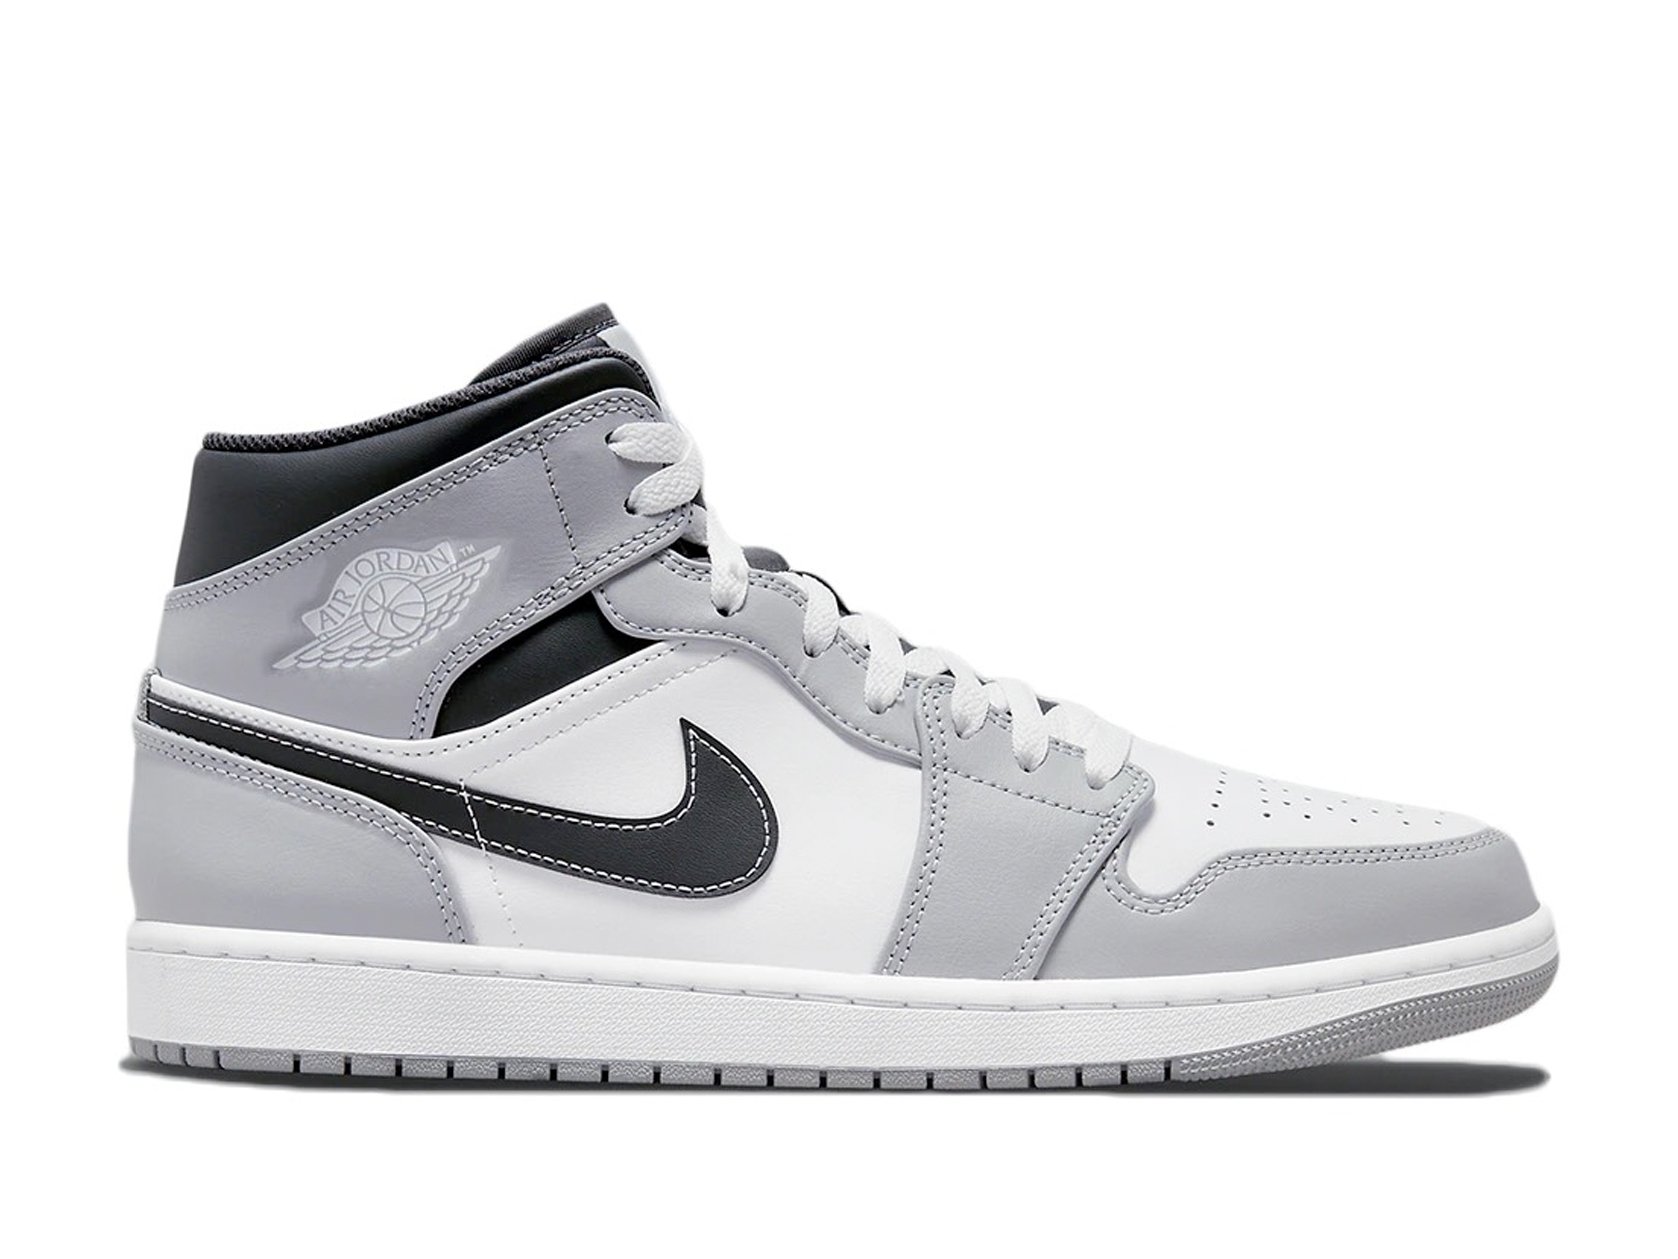 Double Boxed General 299.99 Nike Air Jordan 1 Mid Light Smoke Grey Anthracite Double Boxed